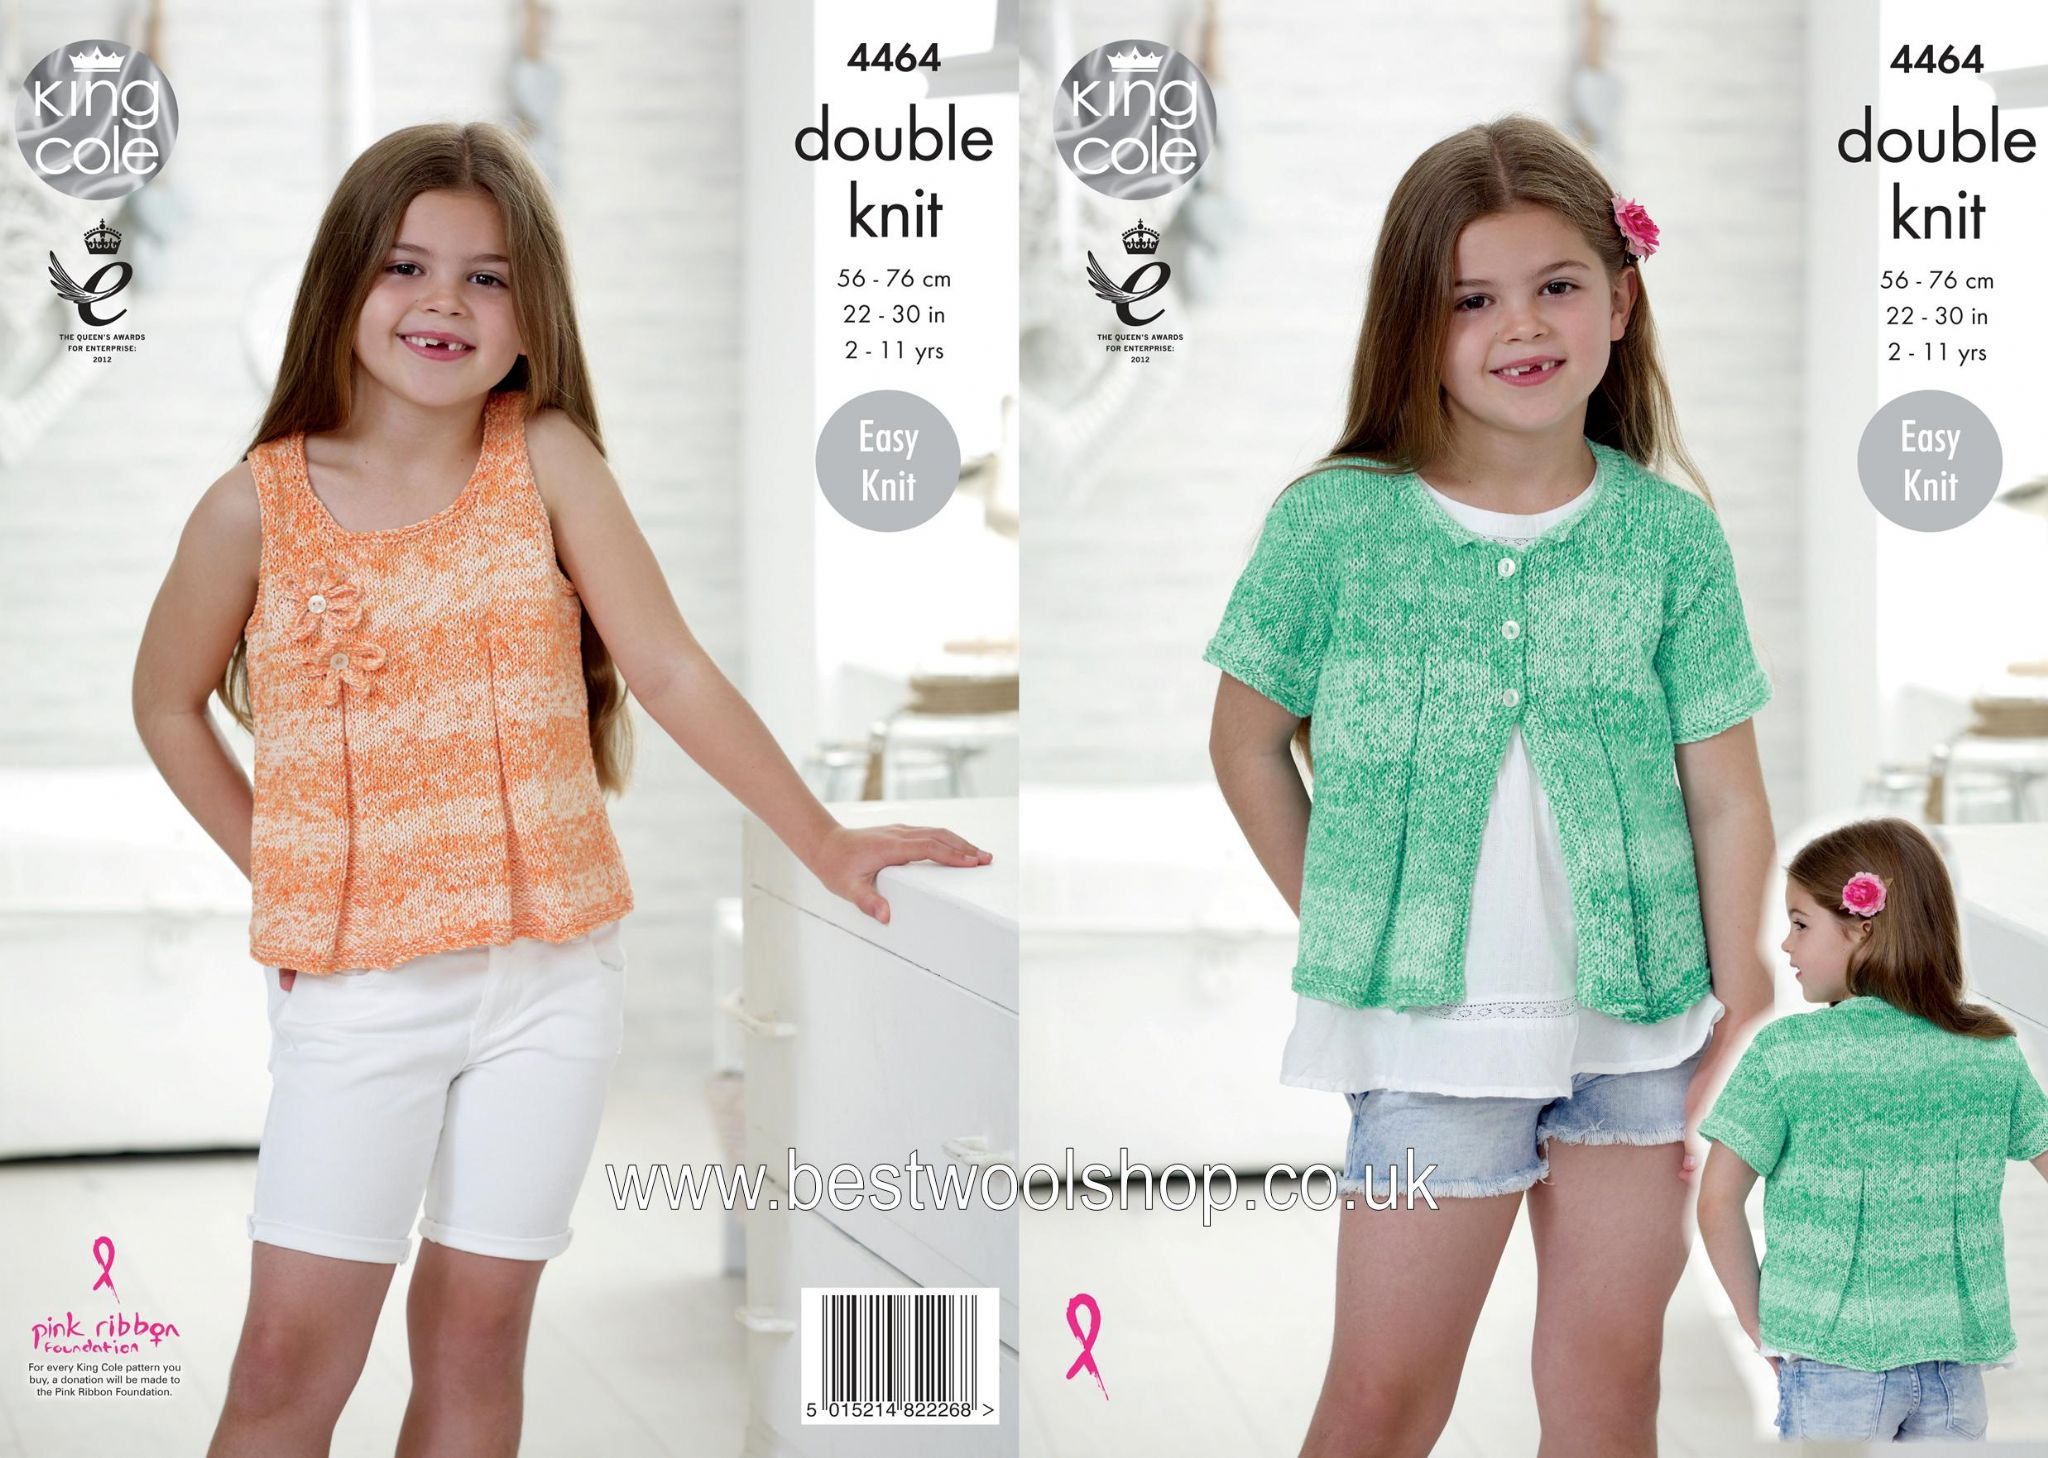 Knitting Patterns Vogue 4464 King Cole Vogue Dk Cardigan Vest Top Bag Knitting Pattern To Fit Age 2 To 11 Years